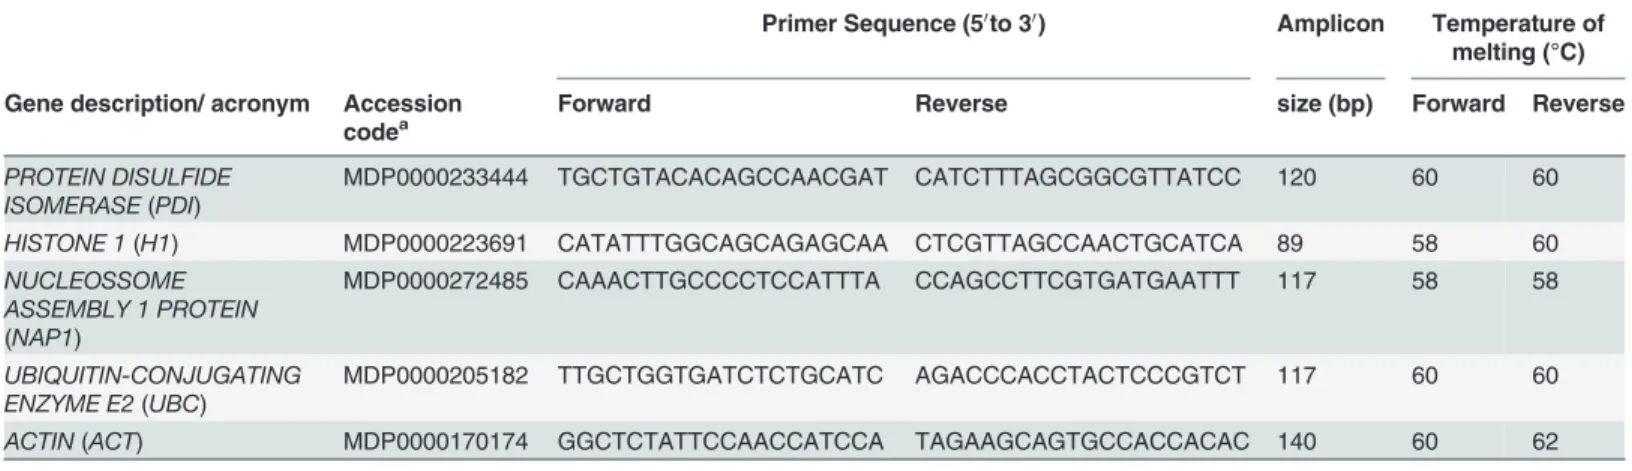 Table 1. Genome and ampliﬁcation information on the candidate reference genes.